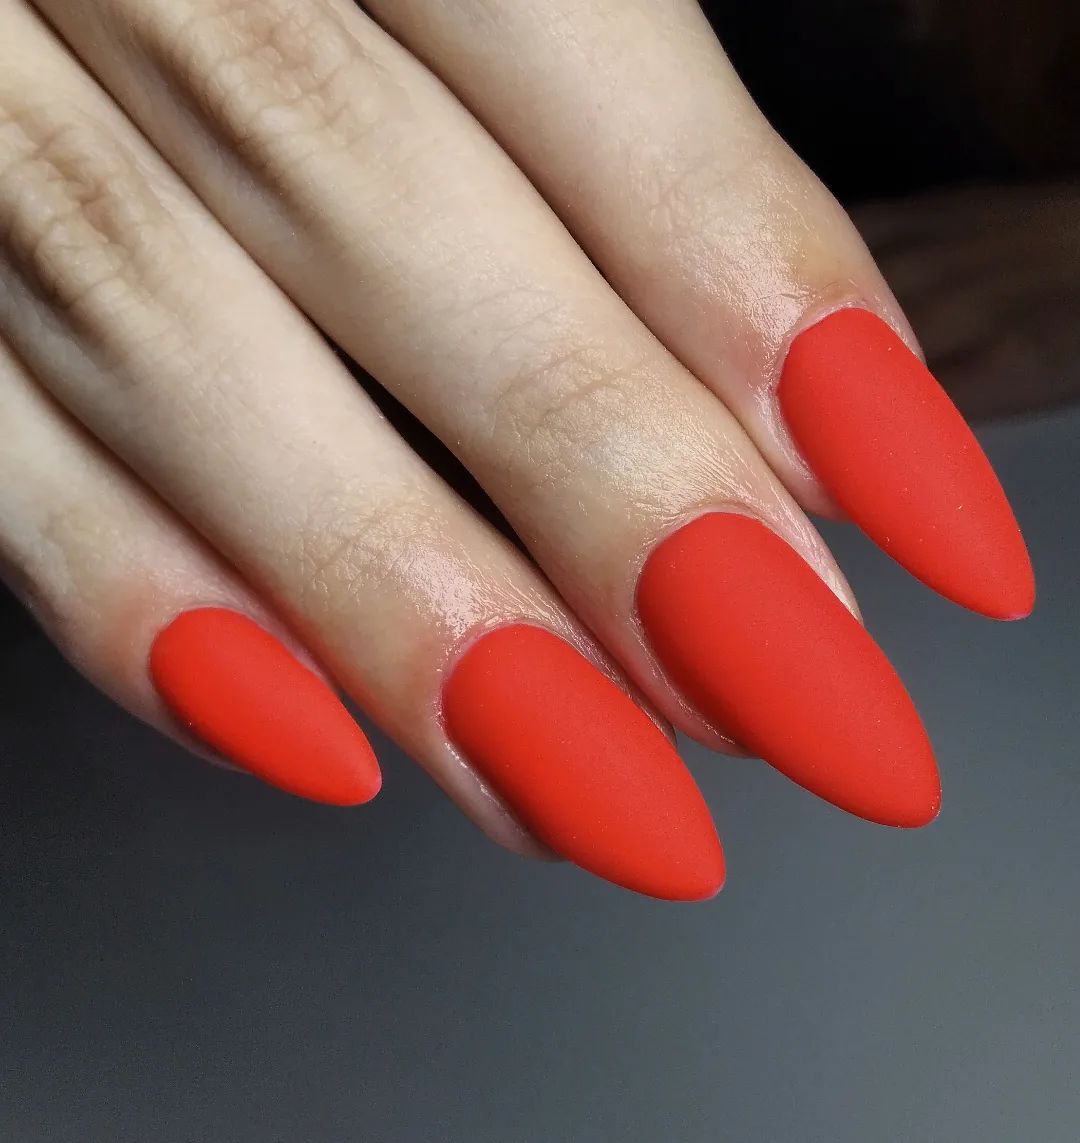 Plain matte red look is sure to help you notice by everyone. It is also good for important events since everyone won't take their eyes on you.